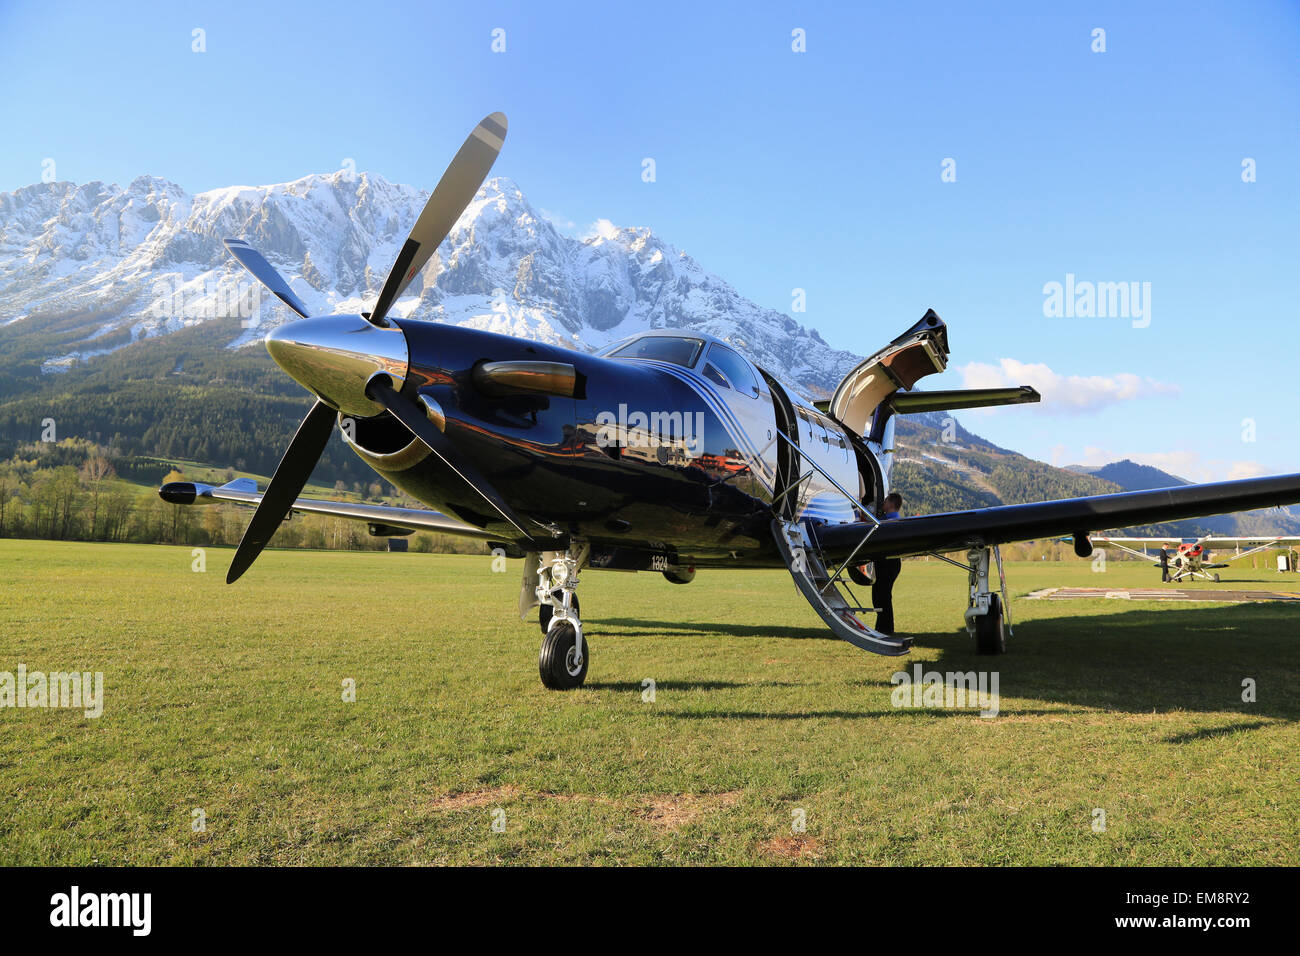 Turboprop aircraft on the ground in Alpen. Stock Photo